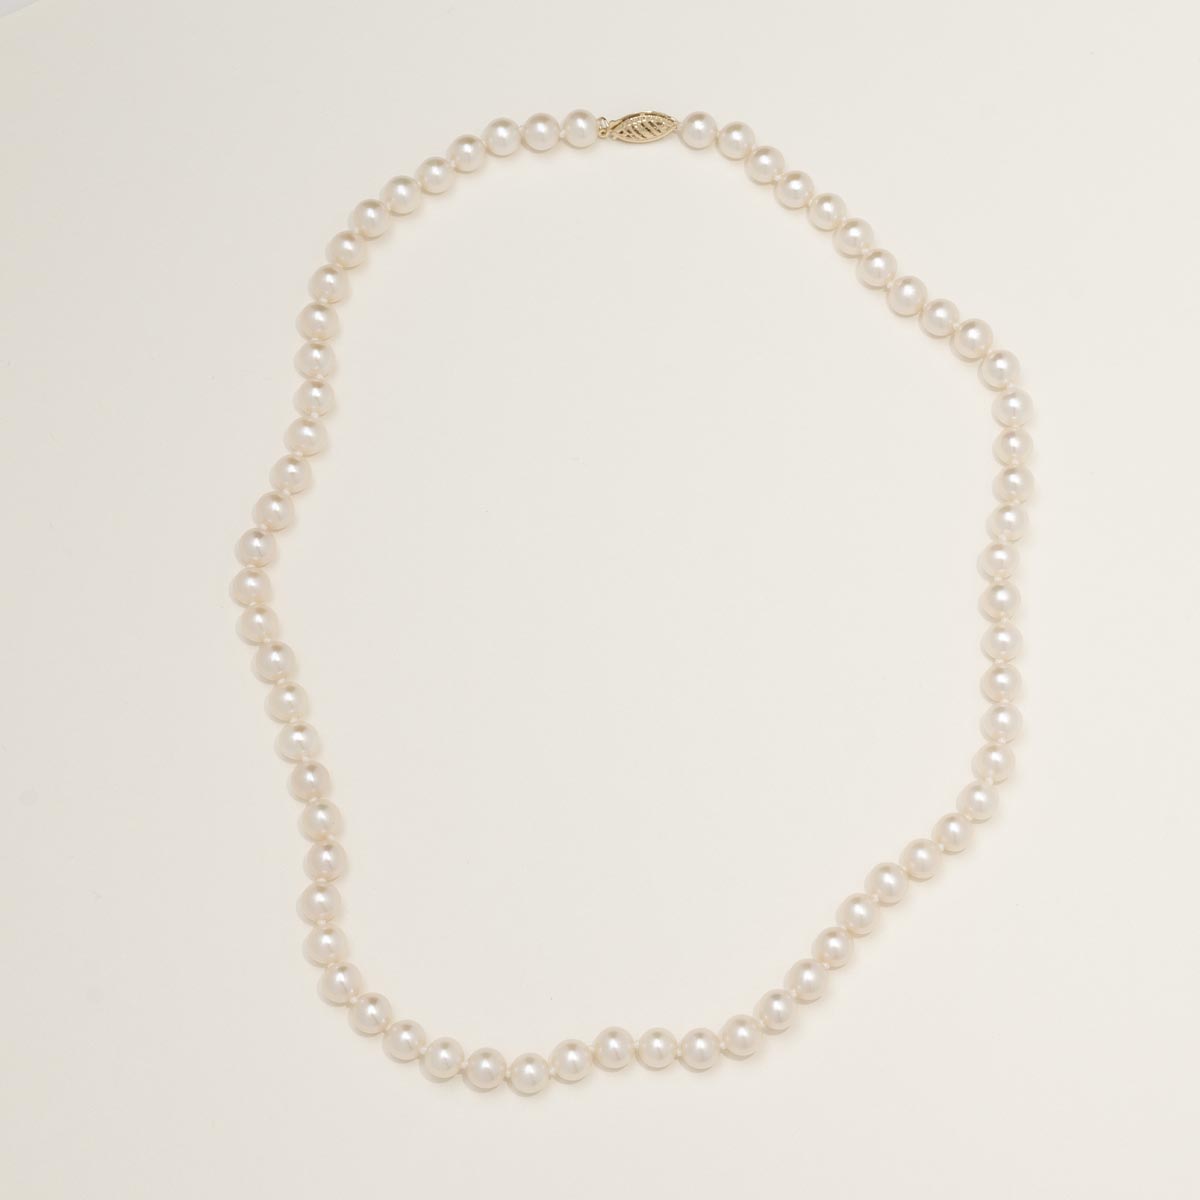 Mastoloni Cultured Freshwater Pearl Strand Necklace in 14kt Yellow Gold (6-6.5mm pearls)